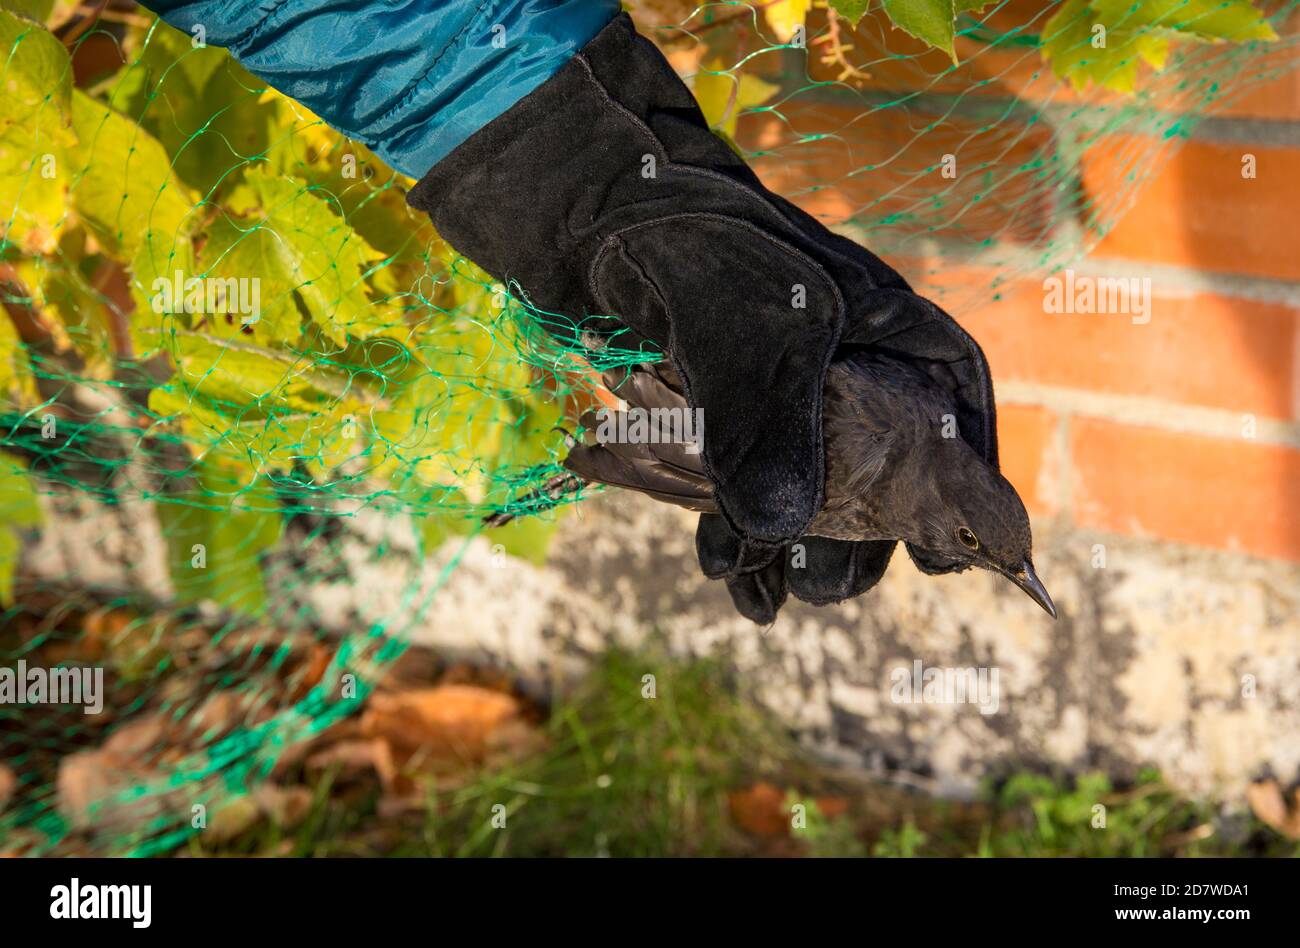 Close up view of person saving black bird stuck in protective green mesh net to protect berries from birds eating these autumn in home garden. Stock Photo